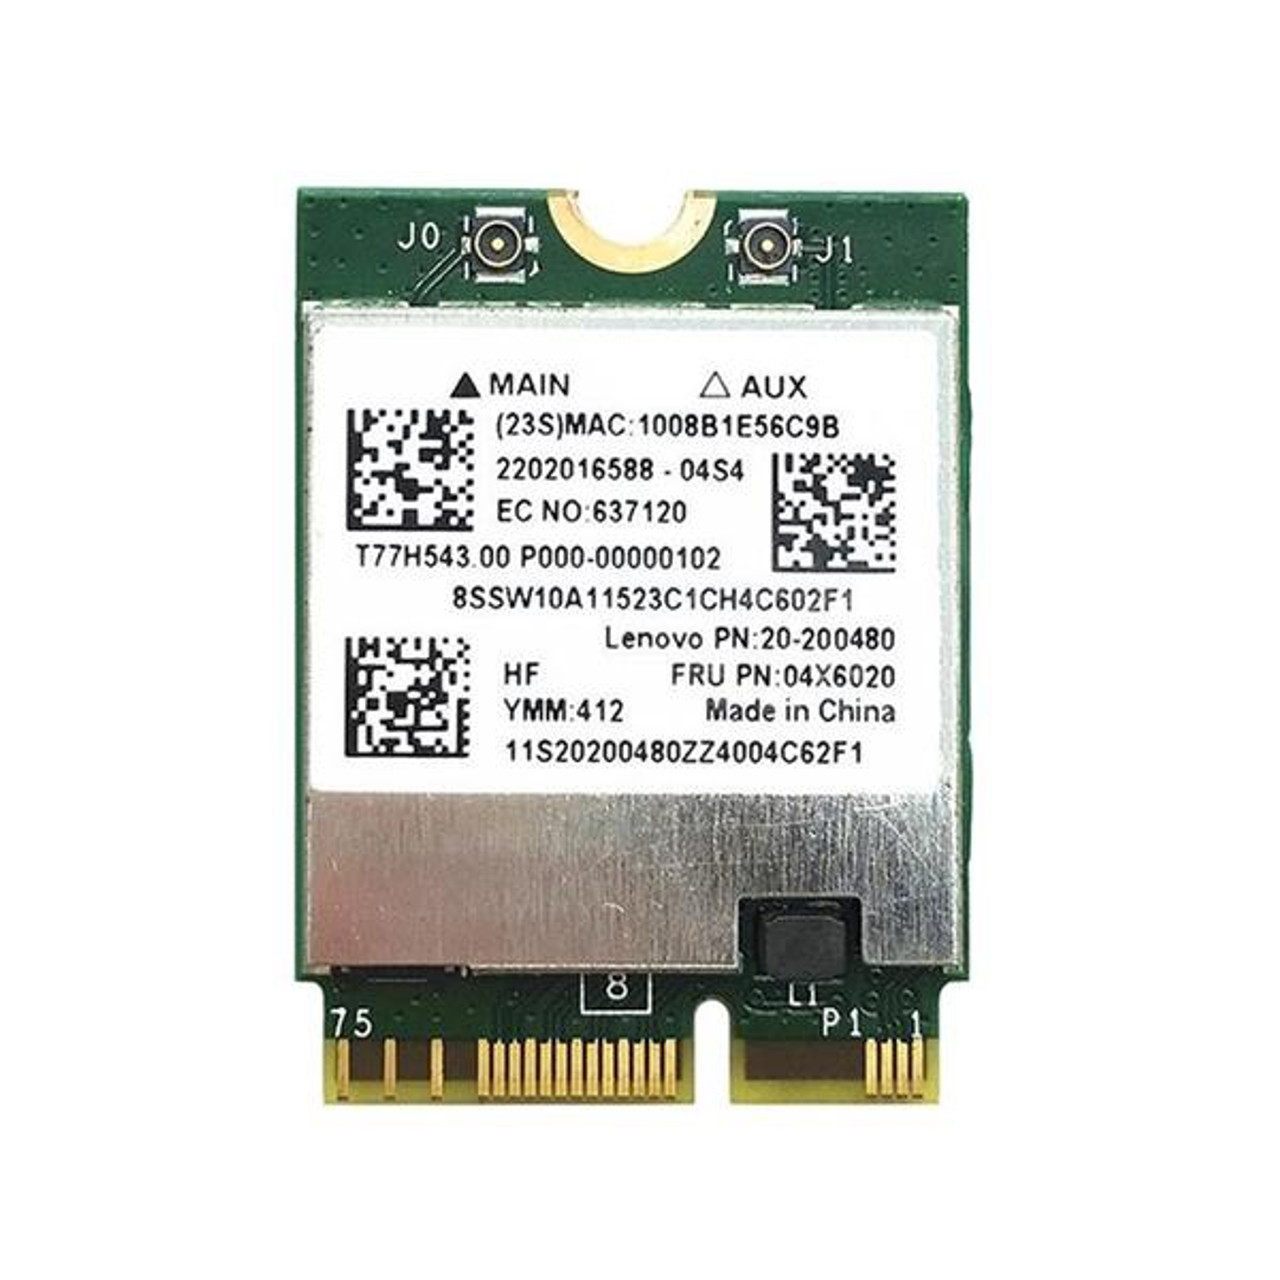 BCM94352Z Broadcom 2.4GHz 300Mbps IEEE 802.11a/b/g Mini PCI WLAN Wireless Network Card for HP Compatible